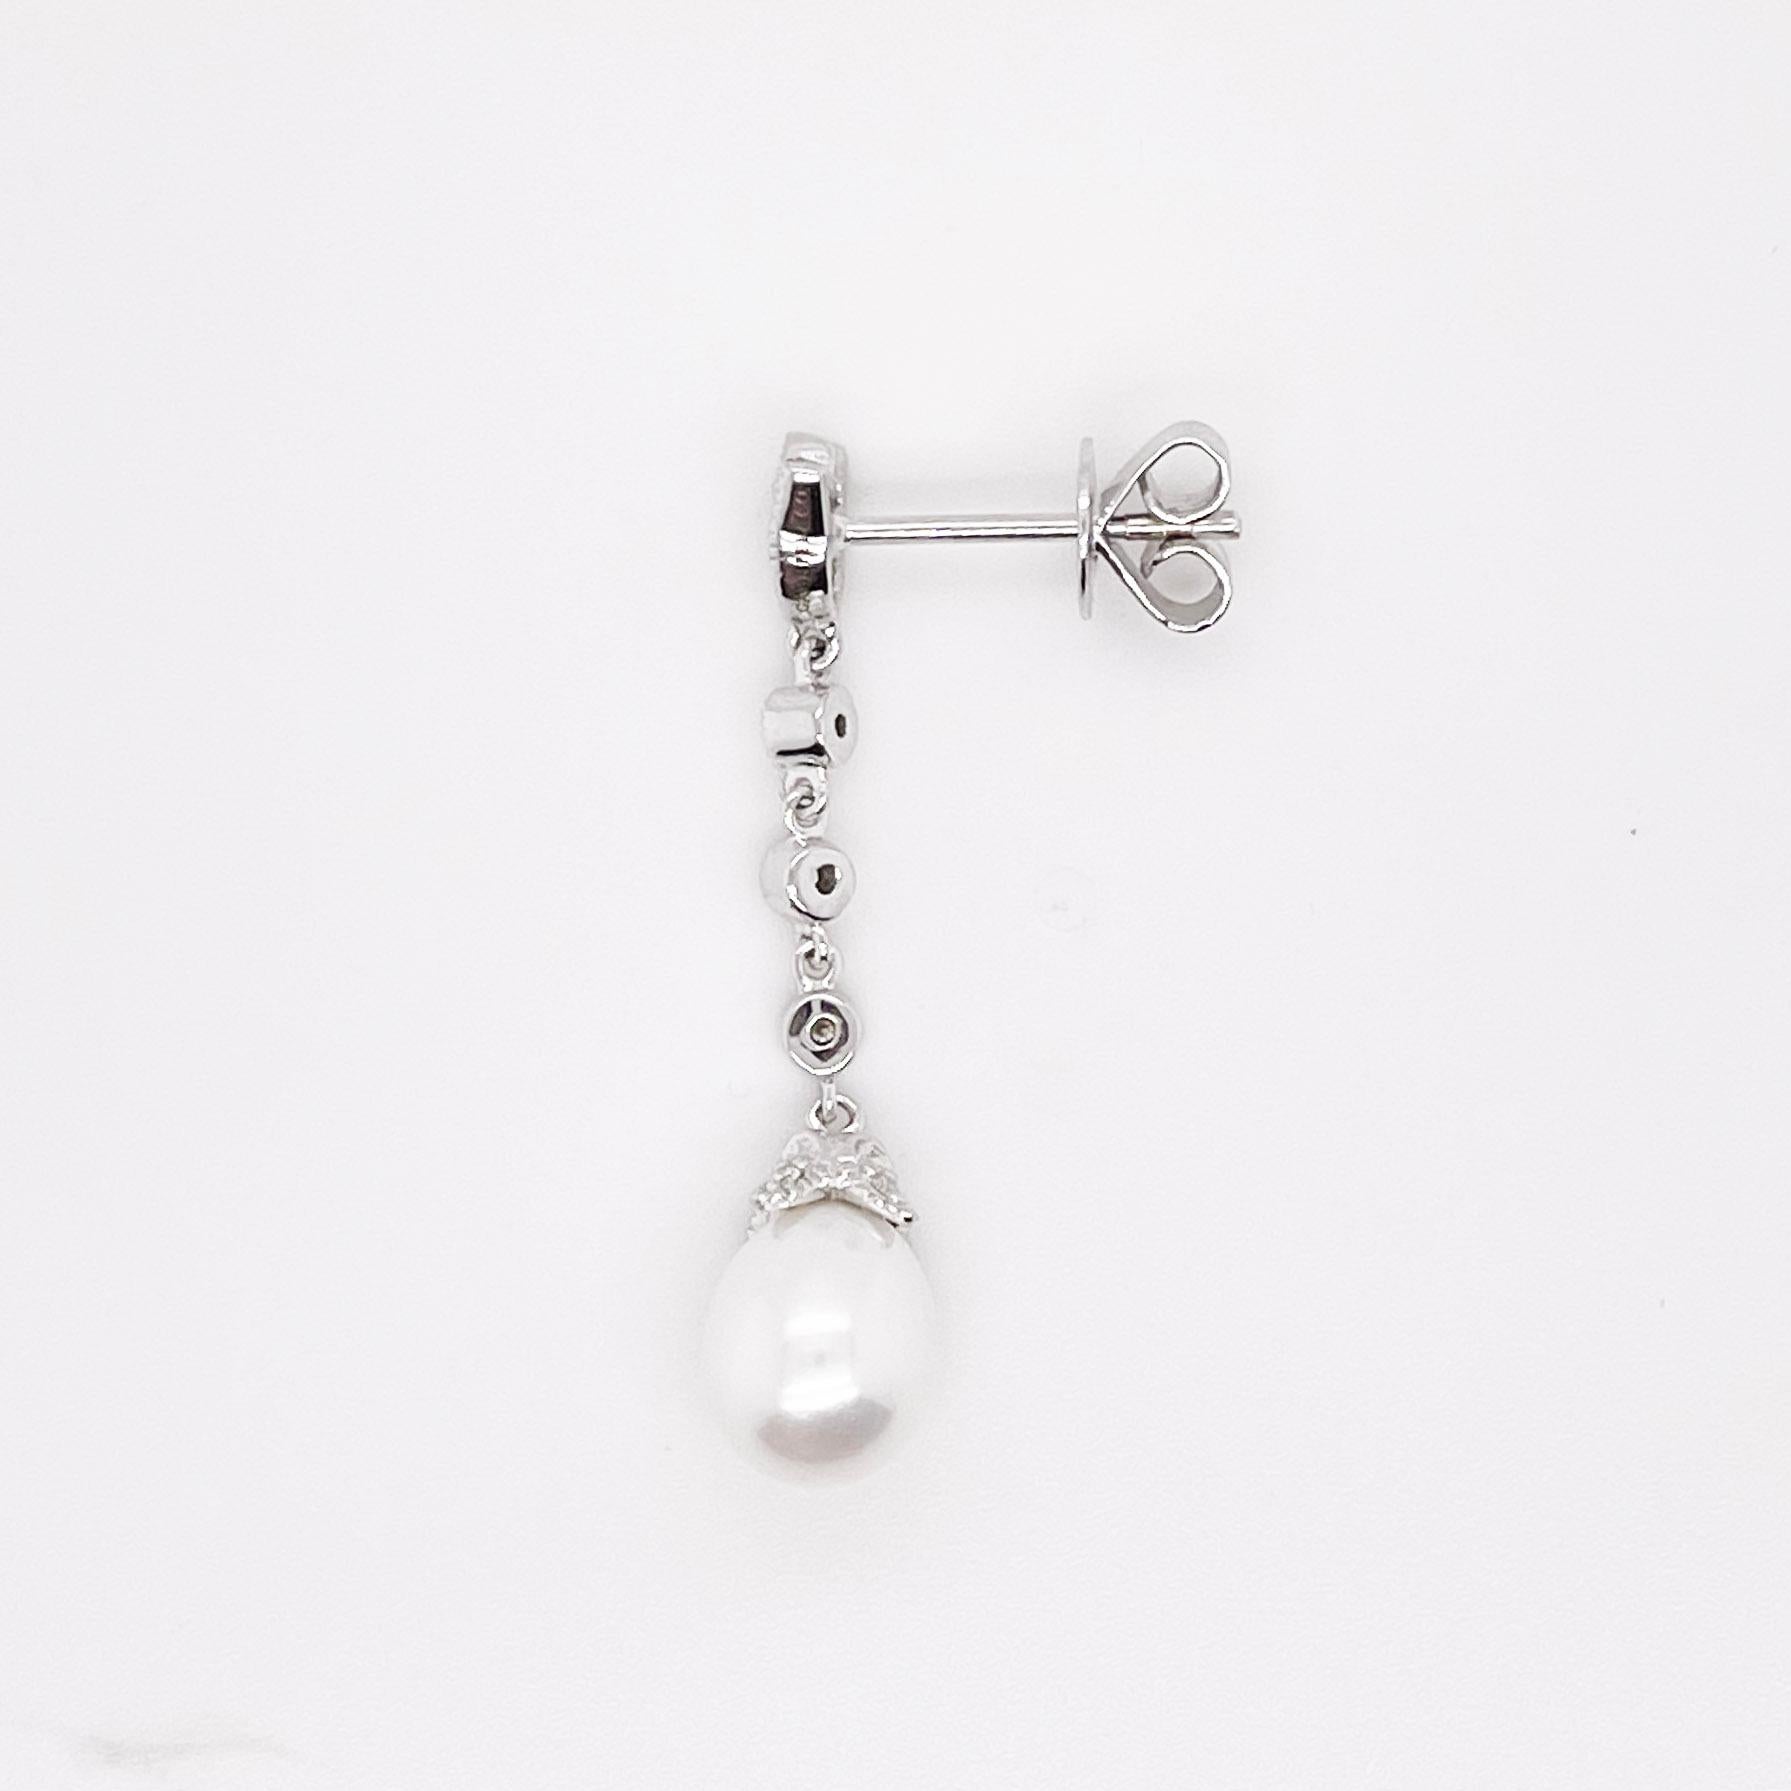 These stunning pearl earrings are the perfect wedding day look or for a formal outfit! The simple elegance of the diamonds and drop pearl scream the perfect wedding day accessory or dressy look!
The details for these gorgeous earrings are listed